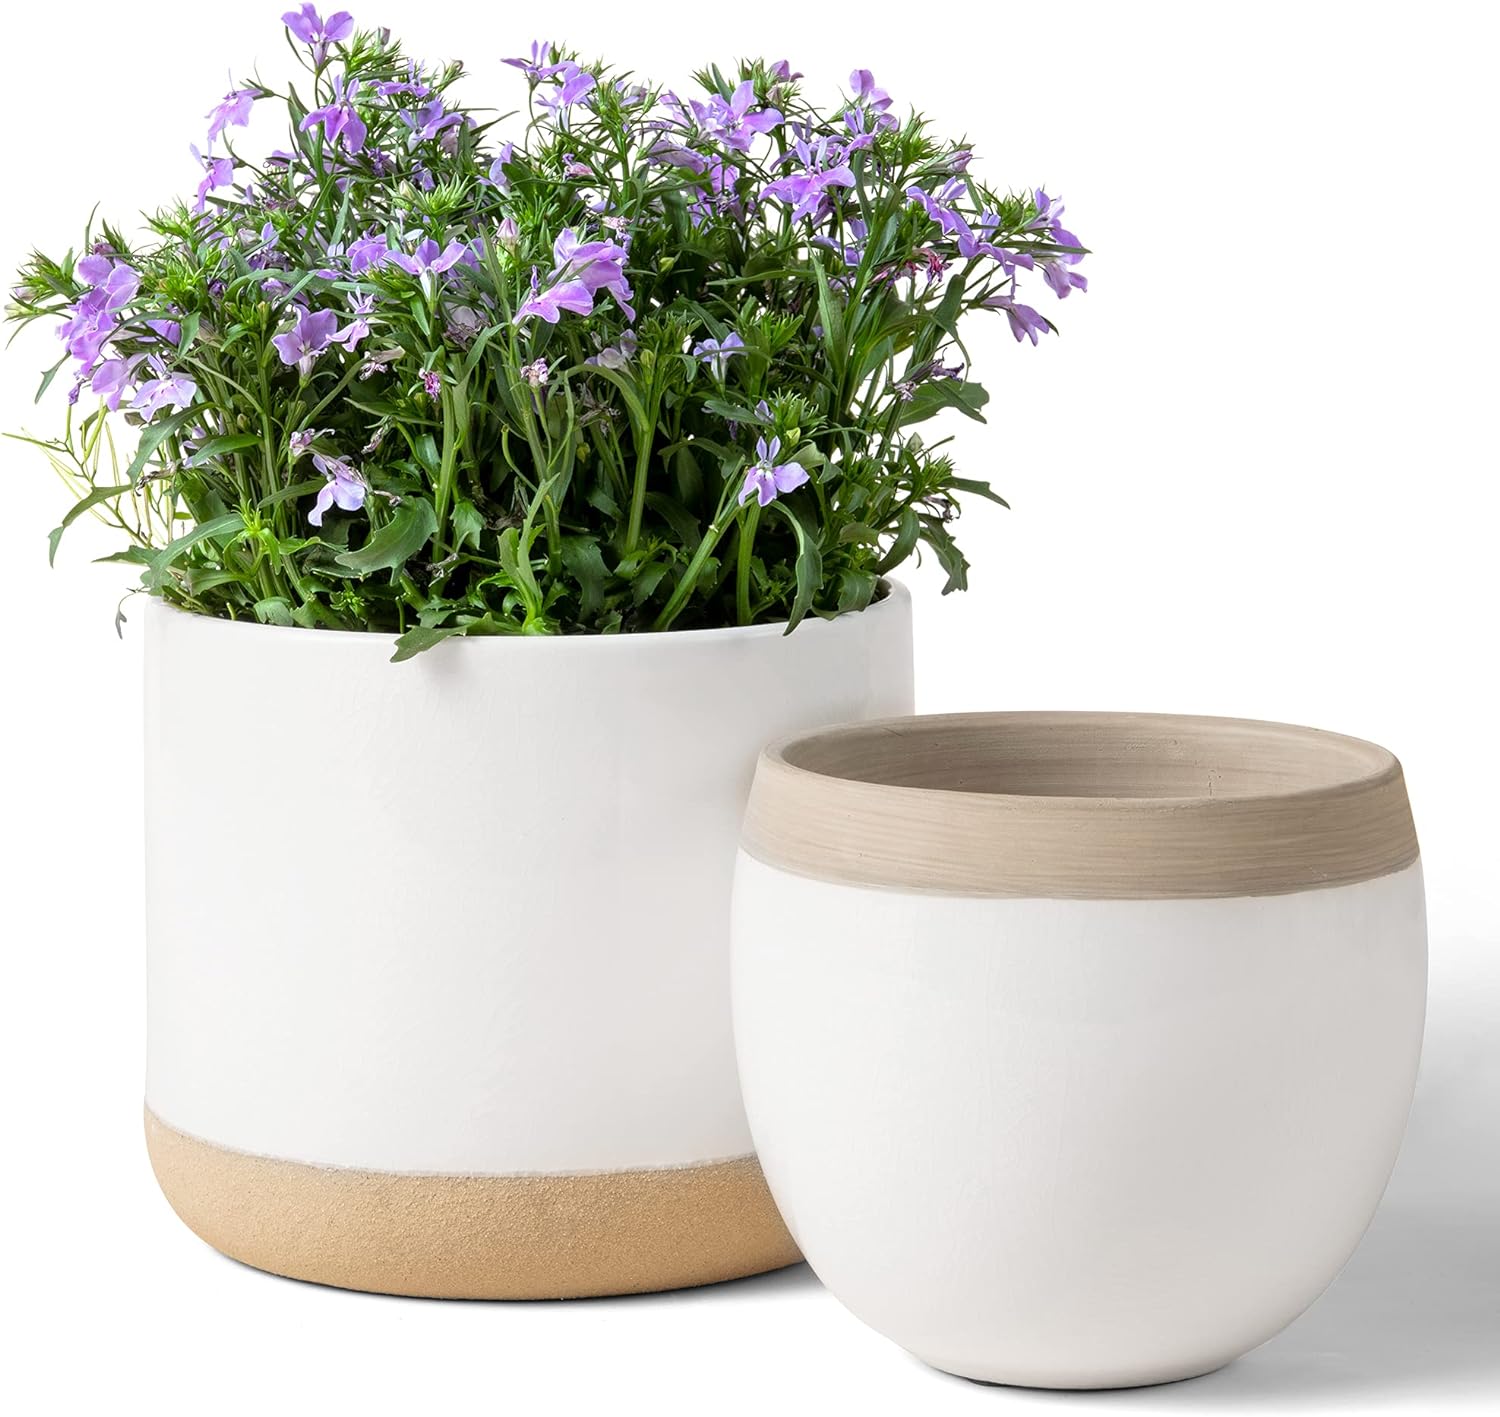 LA JOLIE MUSE White Ceramic Flower Plant Pots - 6.5 + 4.9 Inch Indoor Planters, Plant Containers with Beige and Cracked Detailing